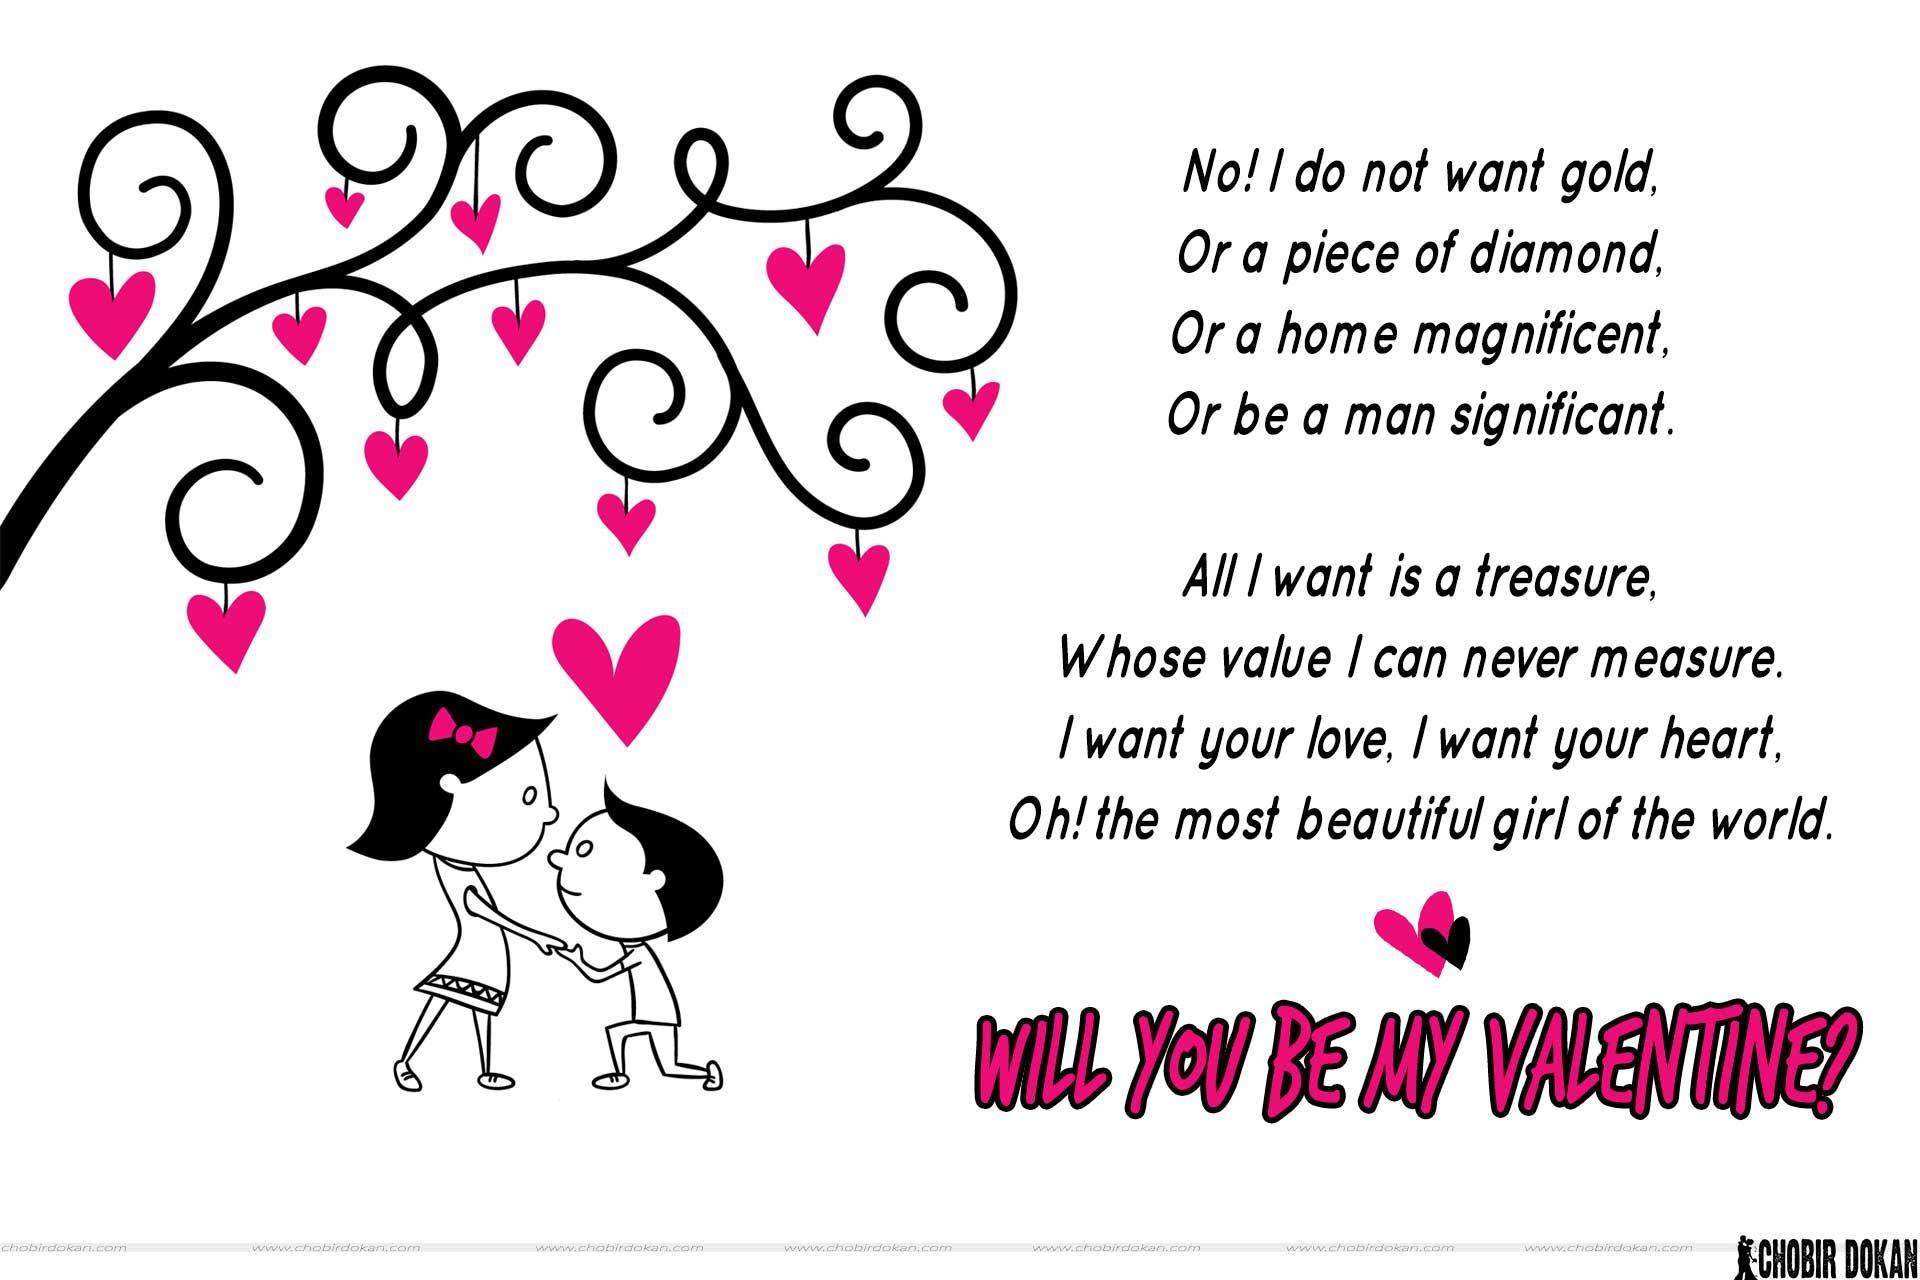 will you be my valentine poems. Valentine poems for him